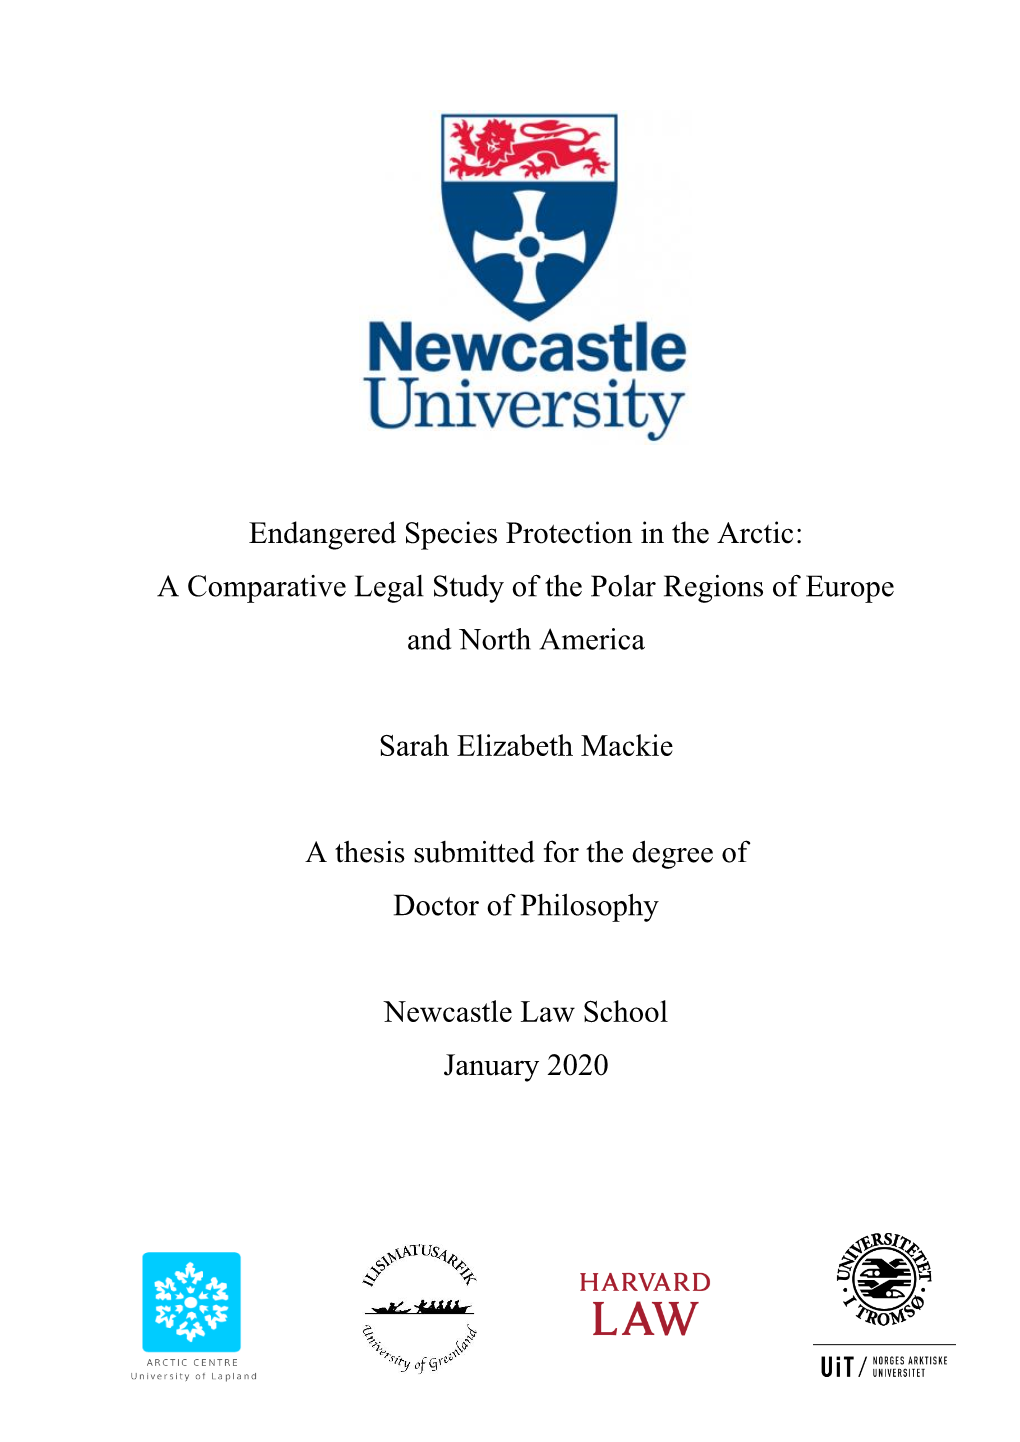 Endangered Species Protection in the Arctic: a Comparative Legal Study of the Polar Regions of Europe and North America